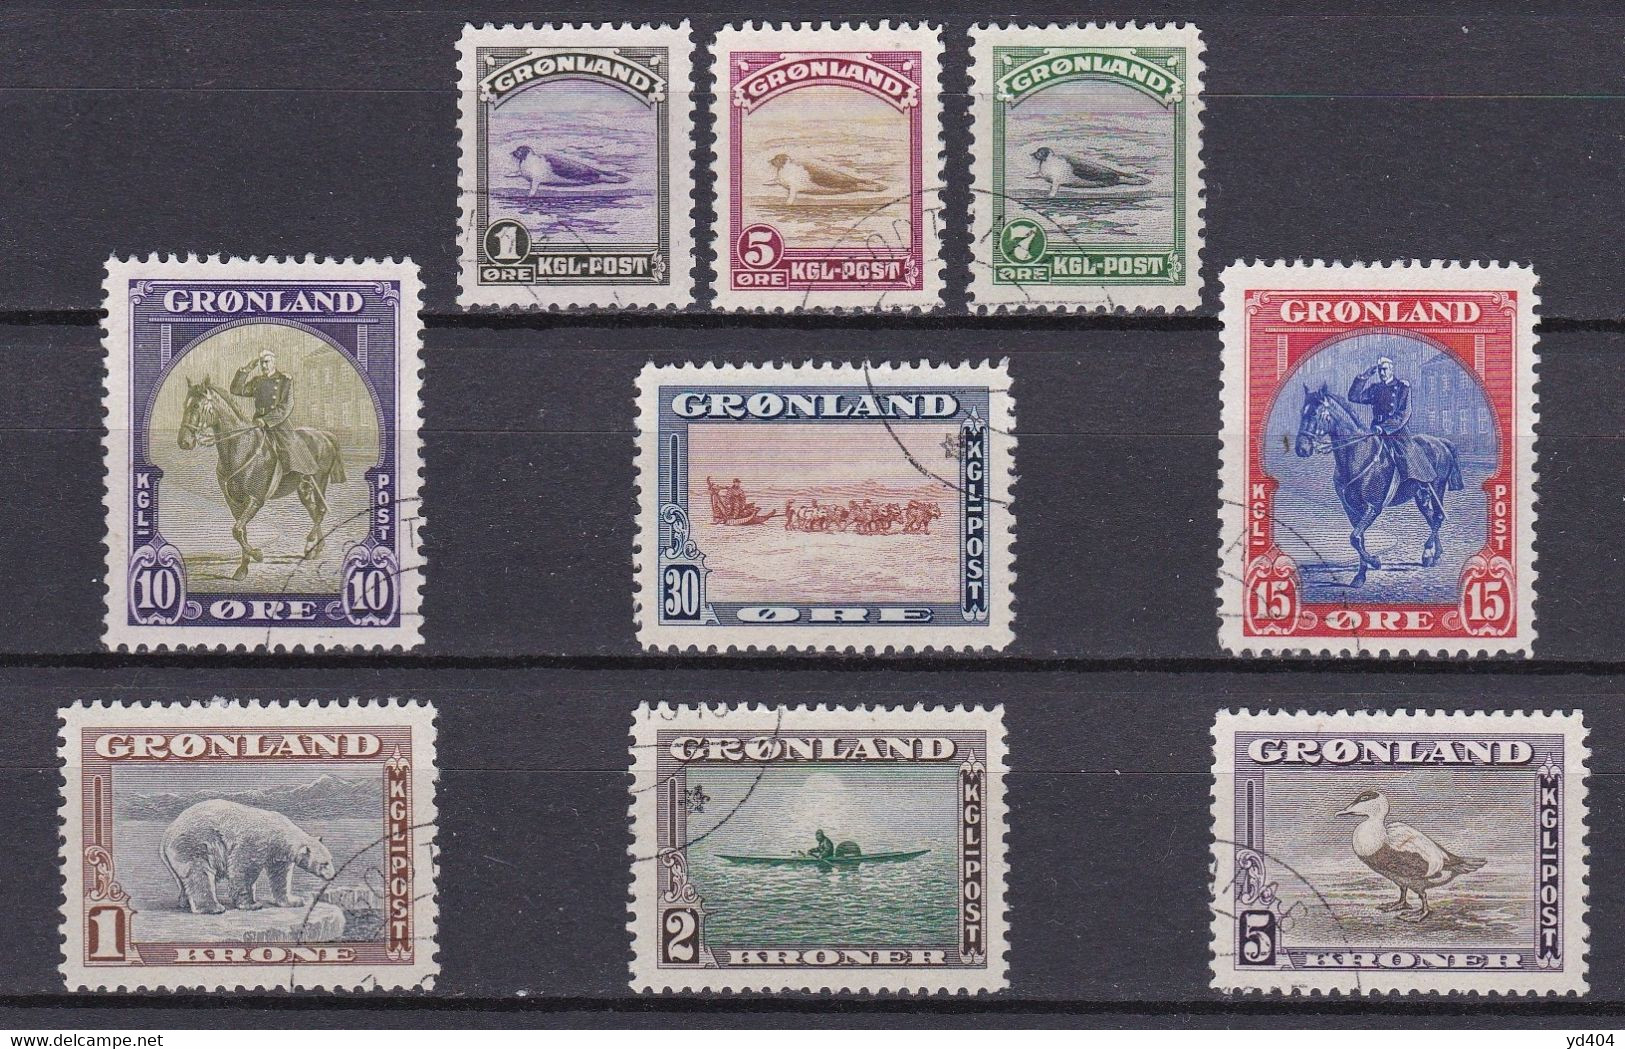 GL002B – GROENLAND - GREENLAND – 1945 – DEFINITIVE ISSUE – SG # 8/16 USED 450 € - Used Stamps